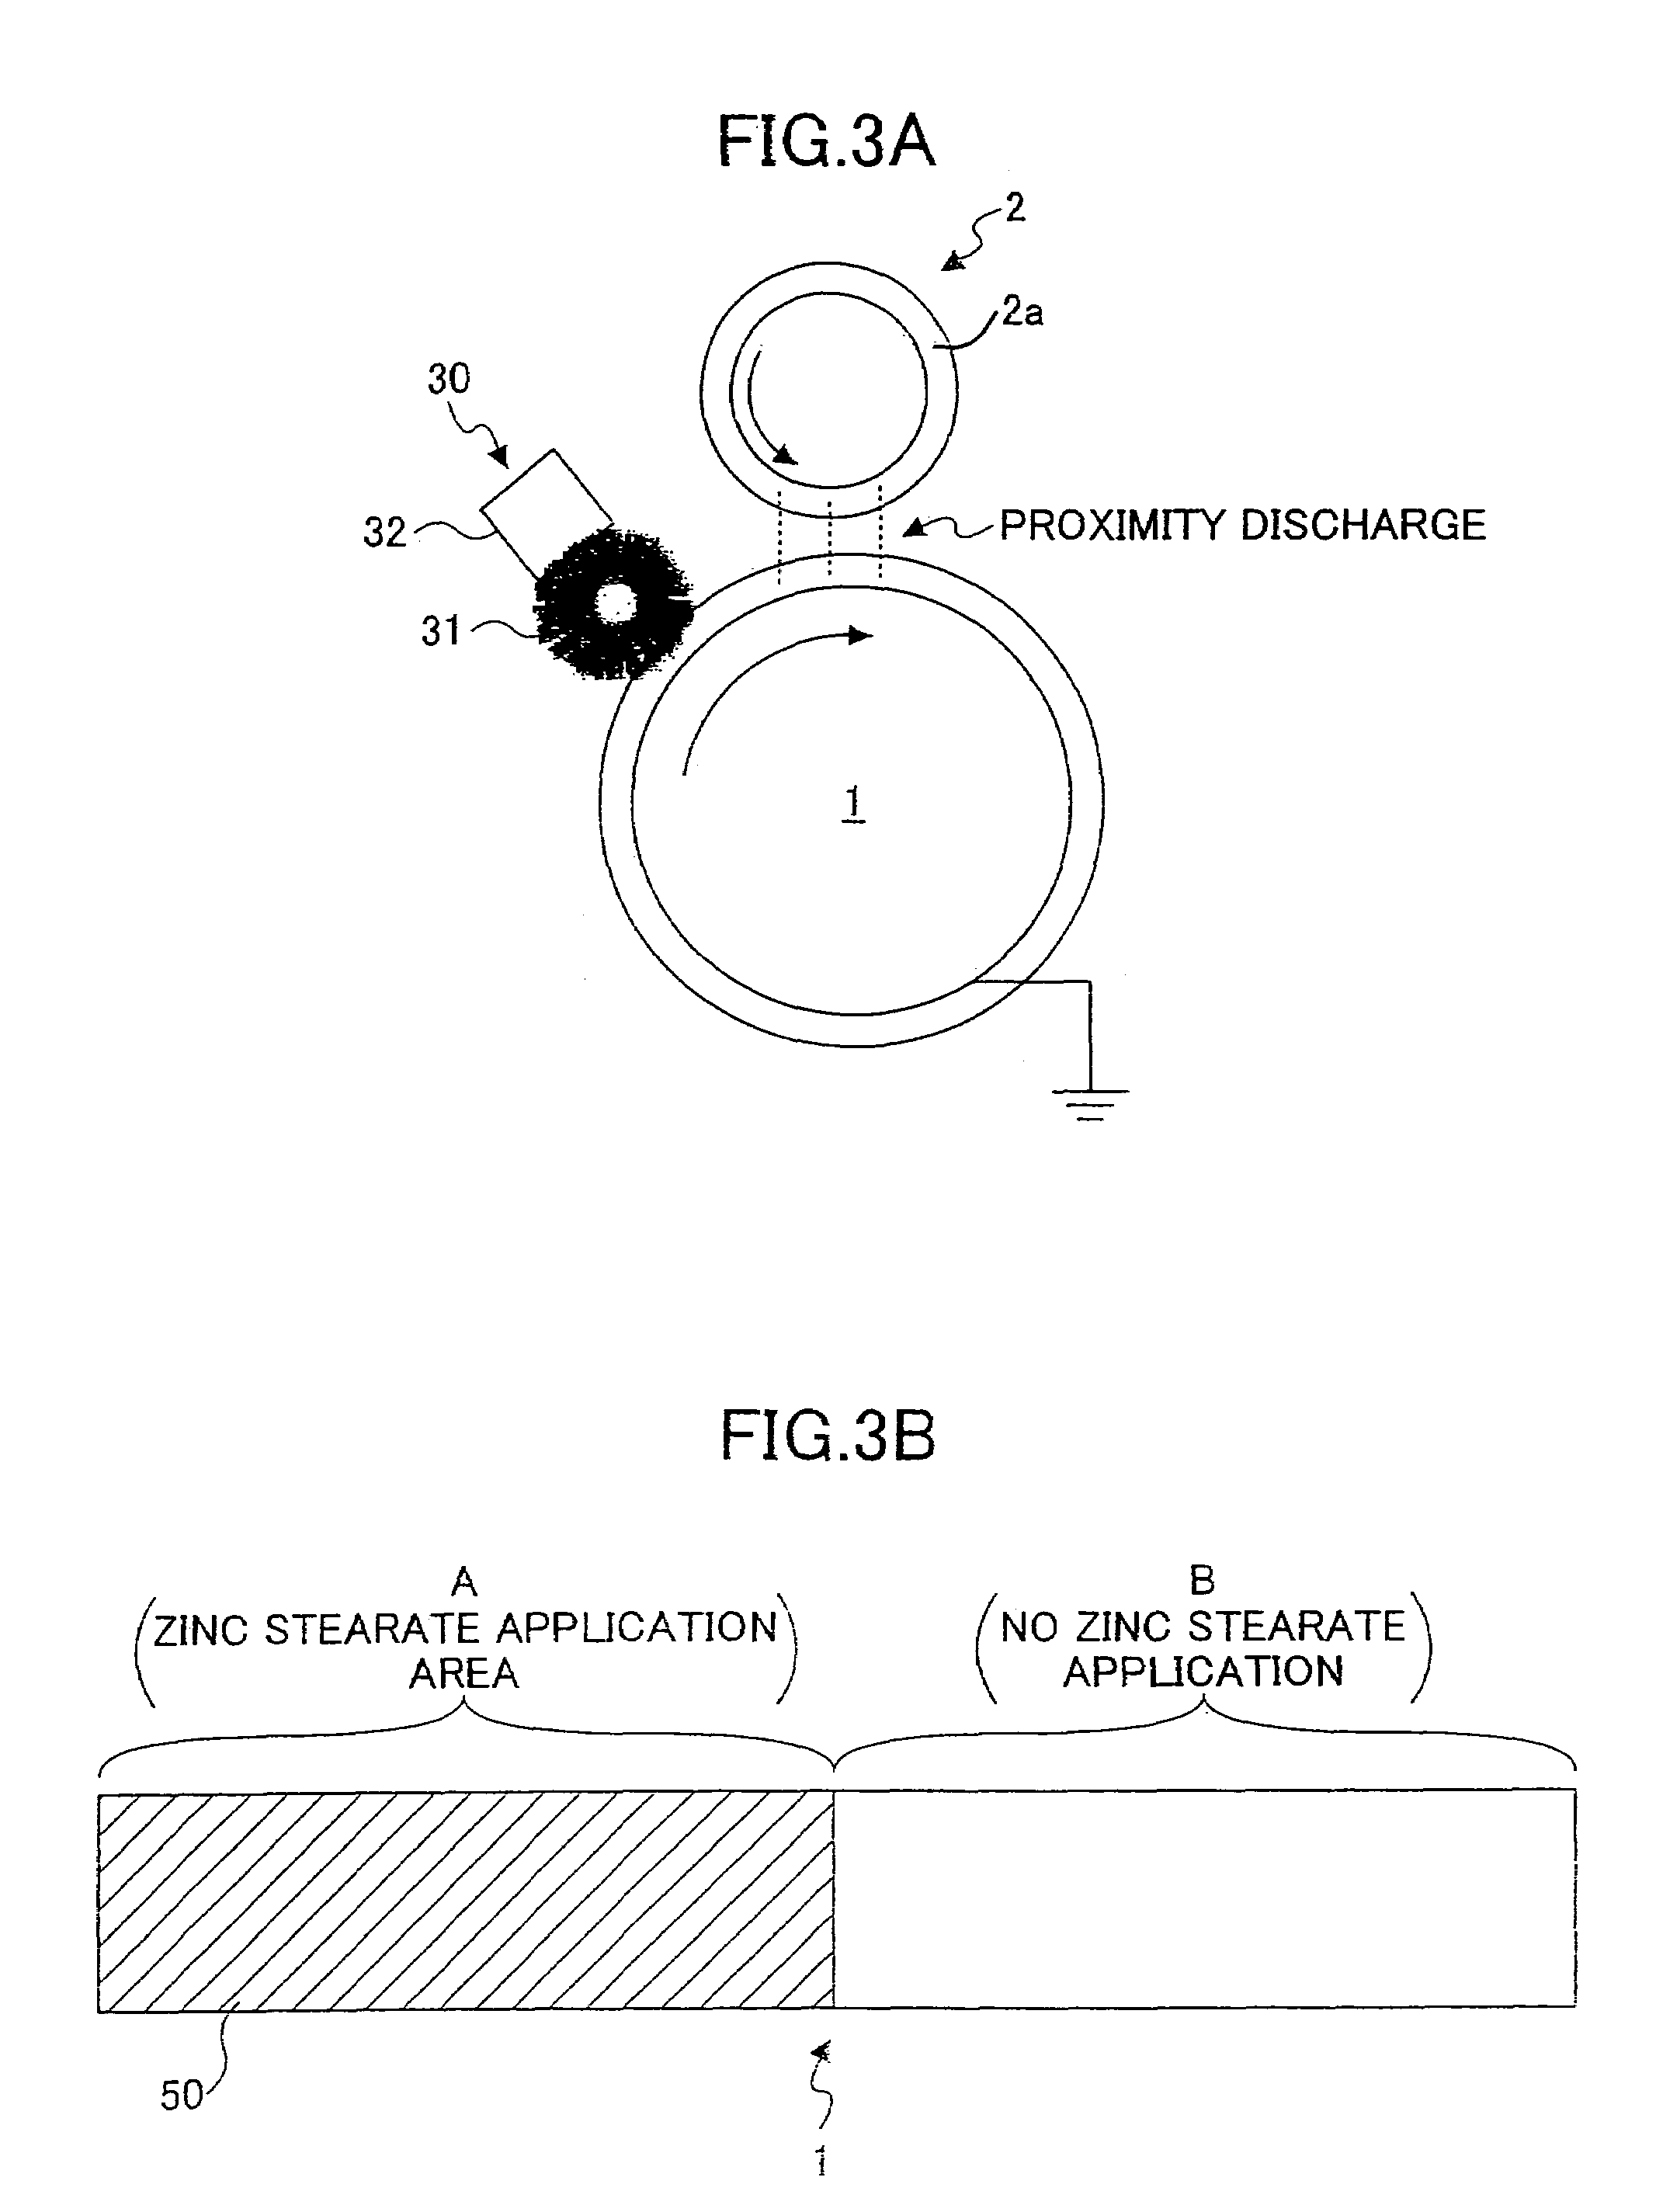 Image formation apparatus having a body to be charged with specified properties and including the use of a protective material